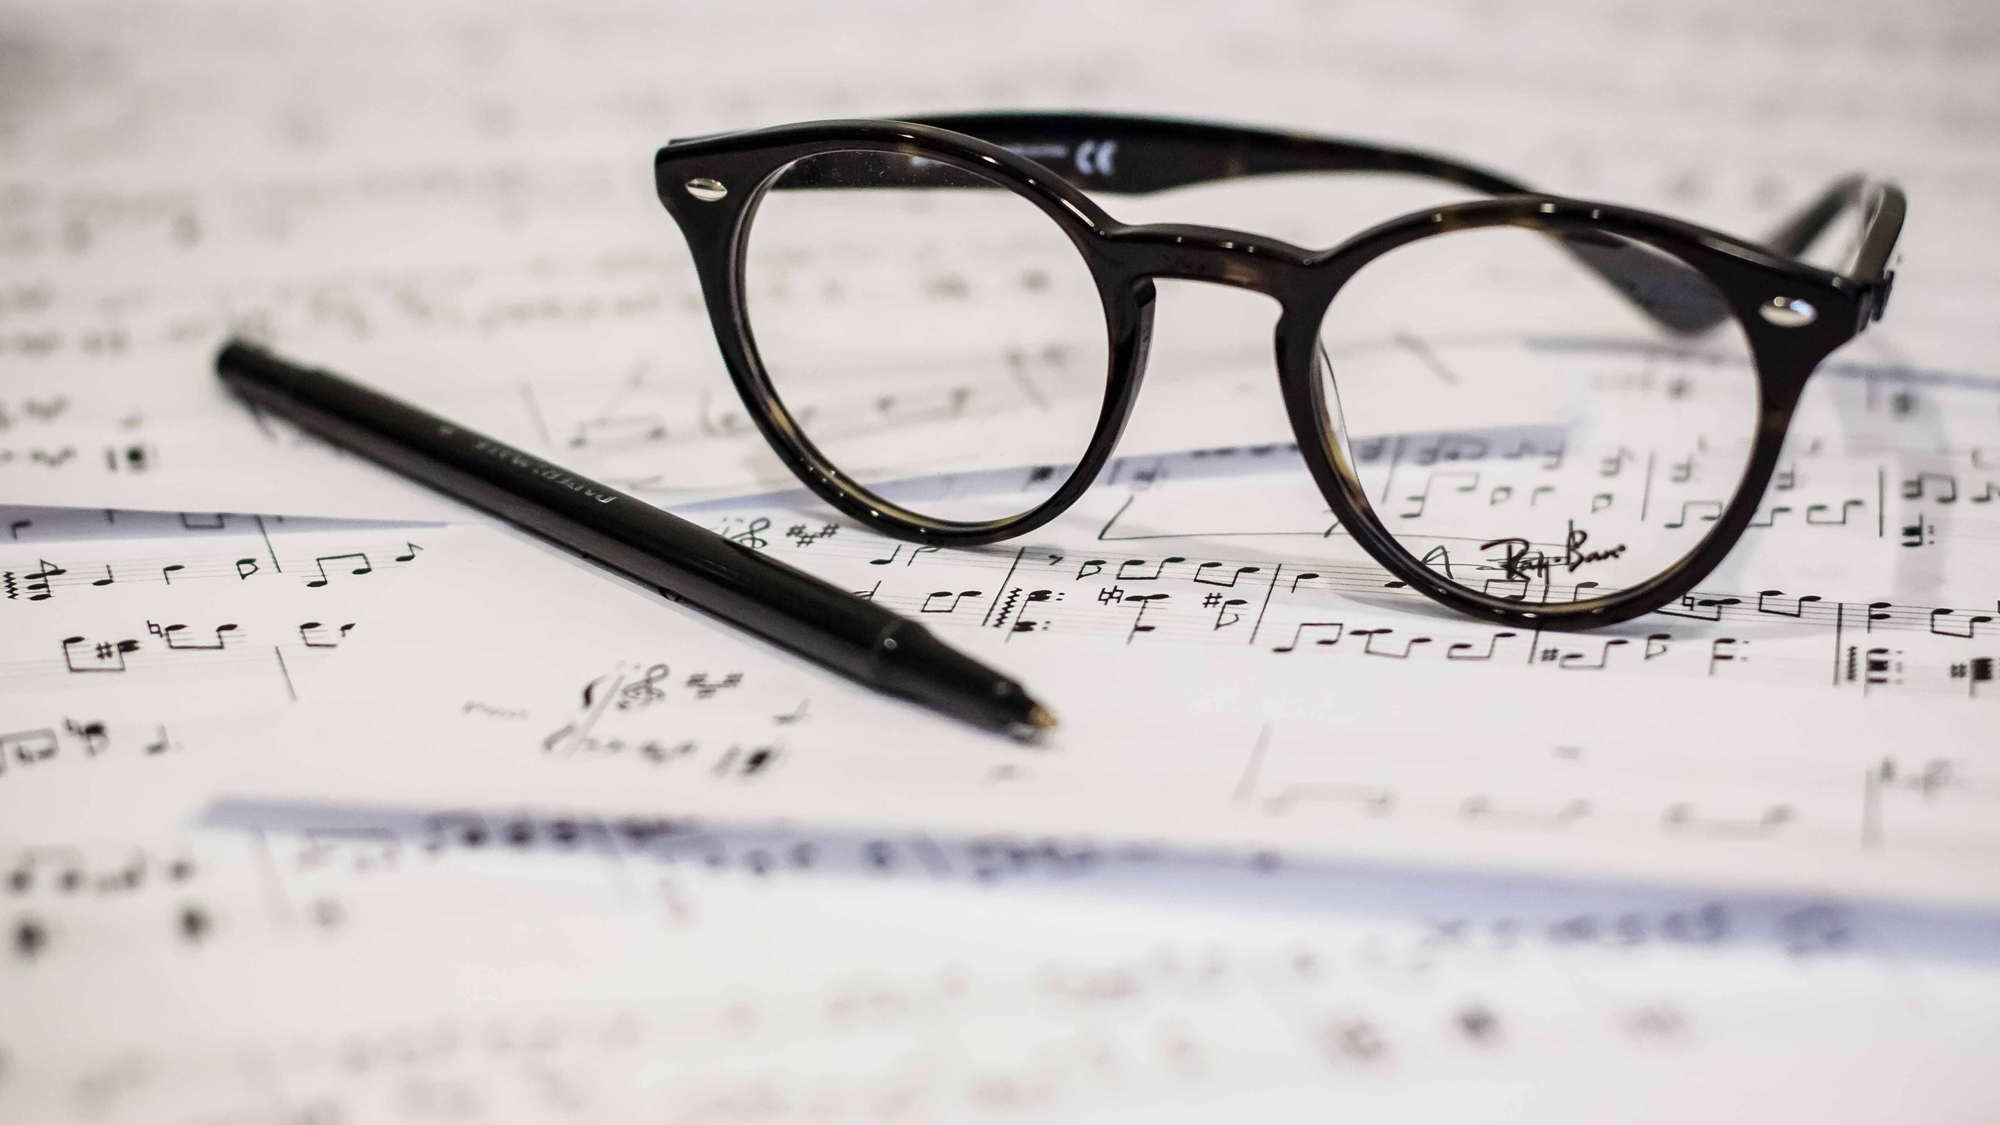 A pair of eyeglasses and a pen on top of pages of music notation.